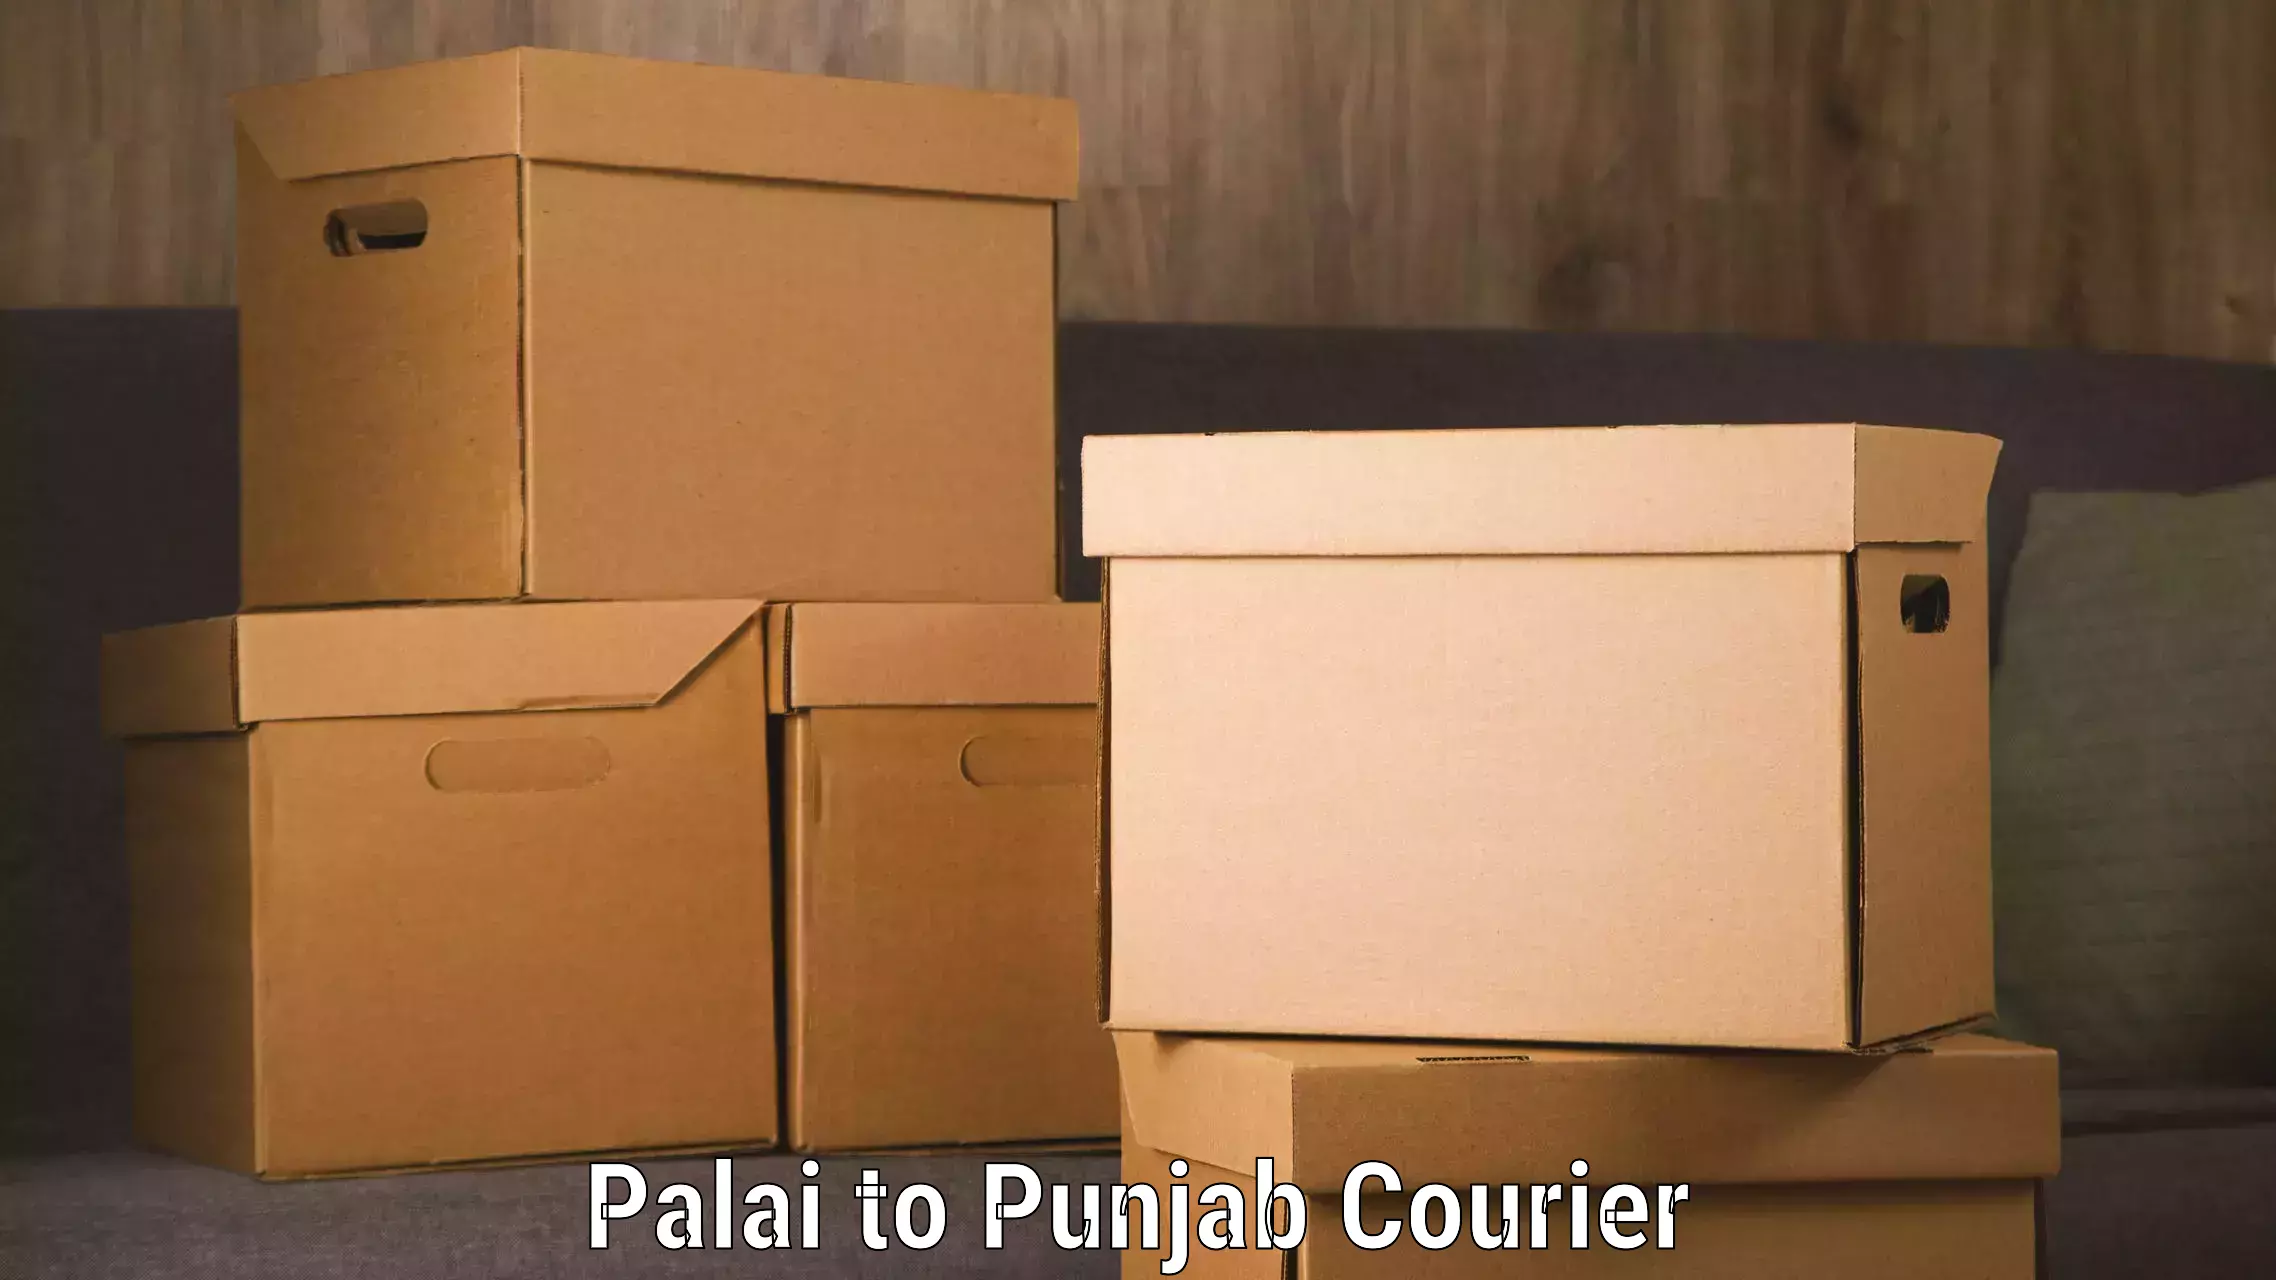 Round-the-clock parcel delivery Palai to Punjab